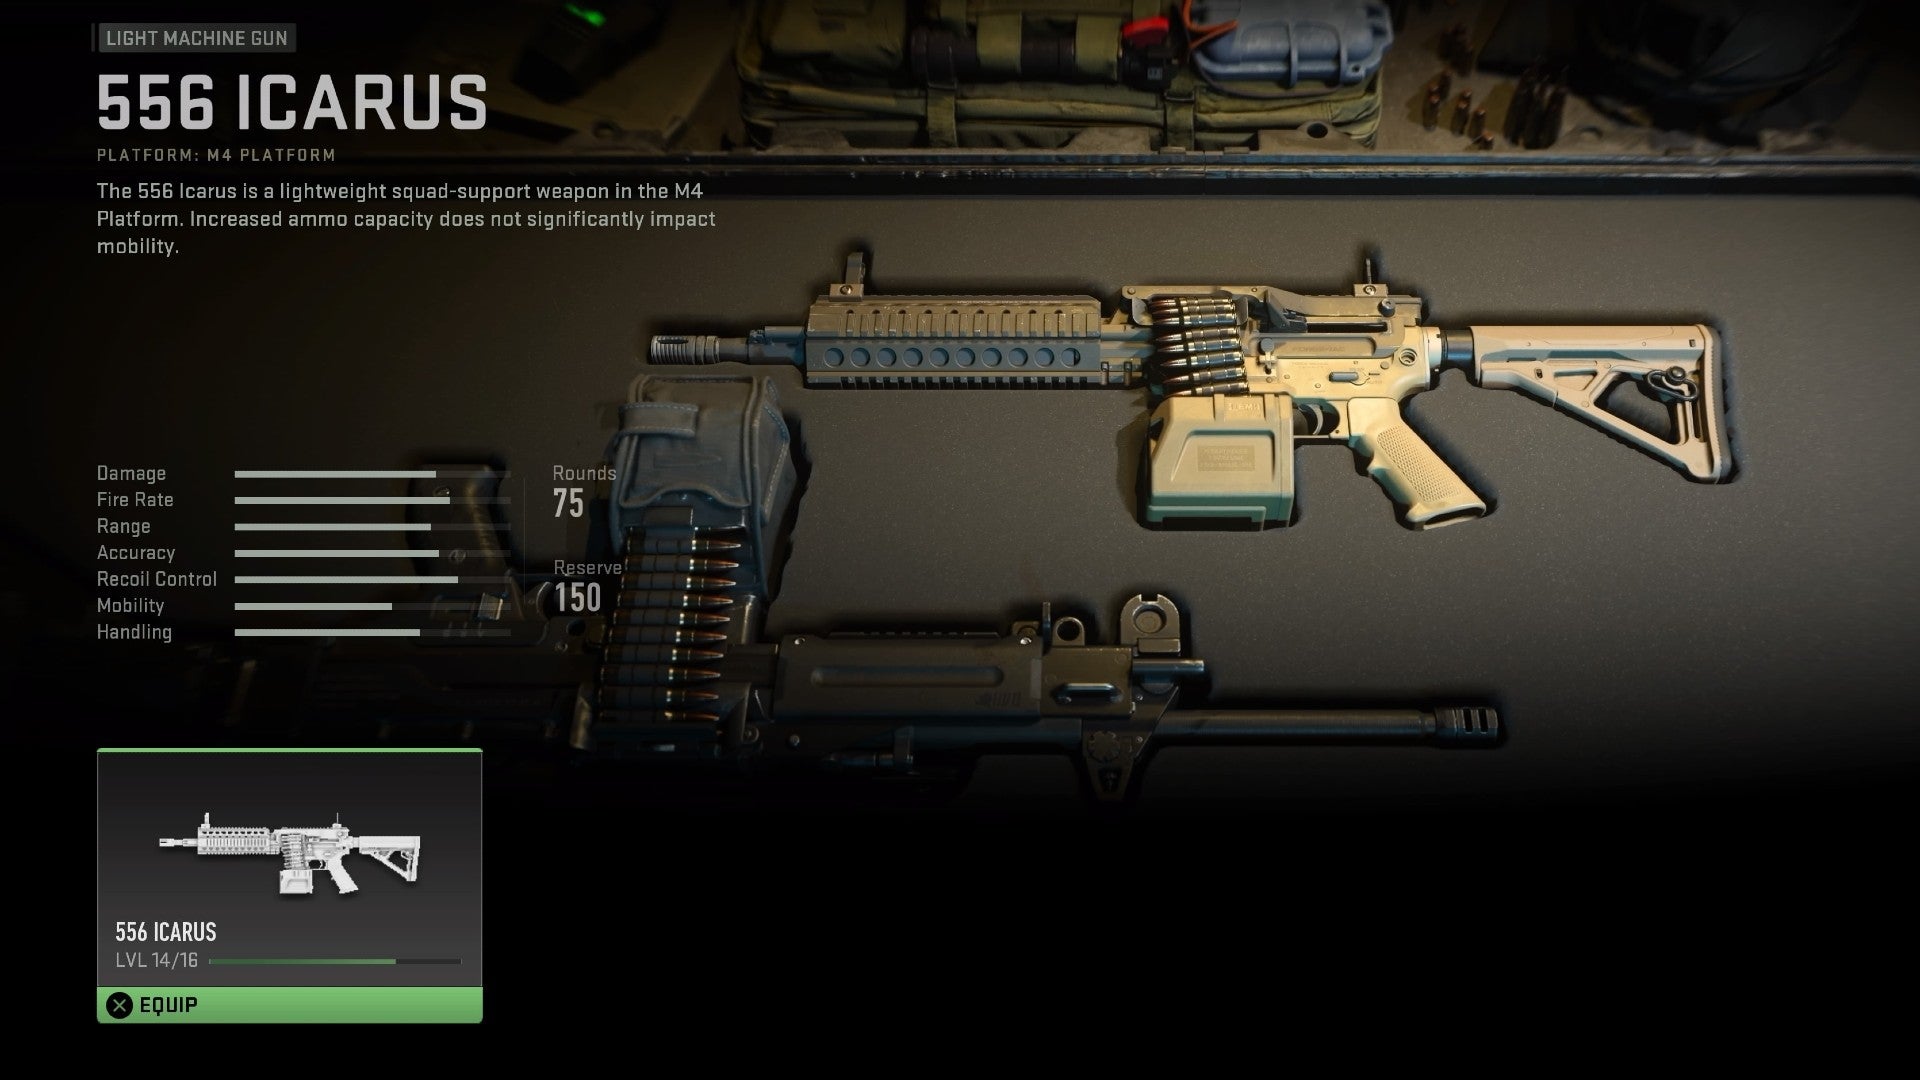 Modern Warfare 2 beta screenshot showing the 556 Icarus in a weapon container, with the stats on the left.